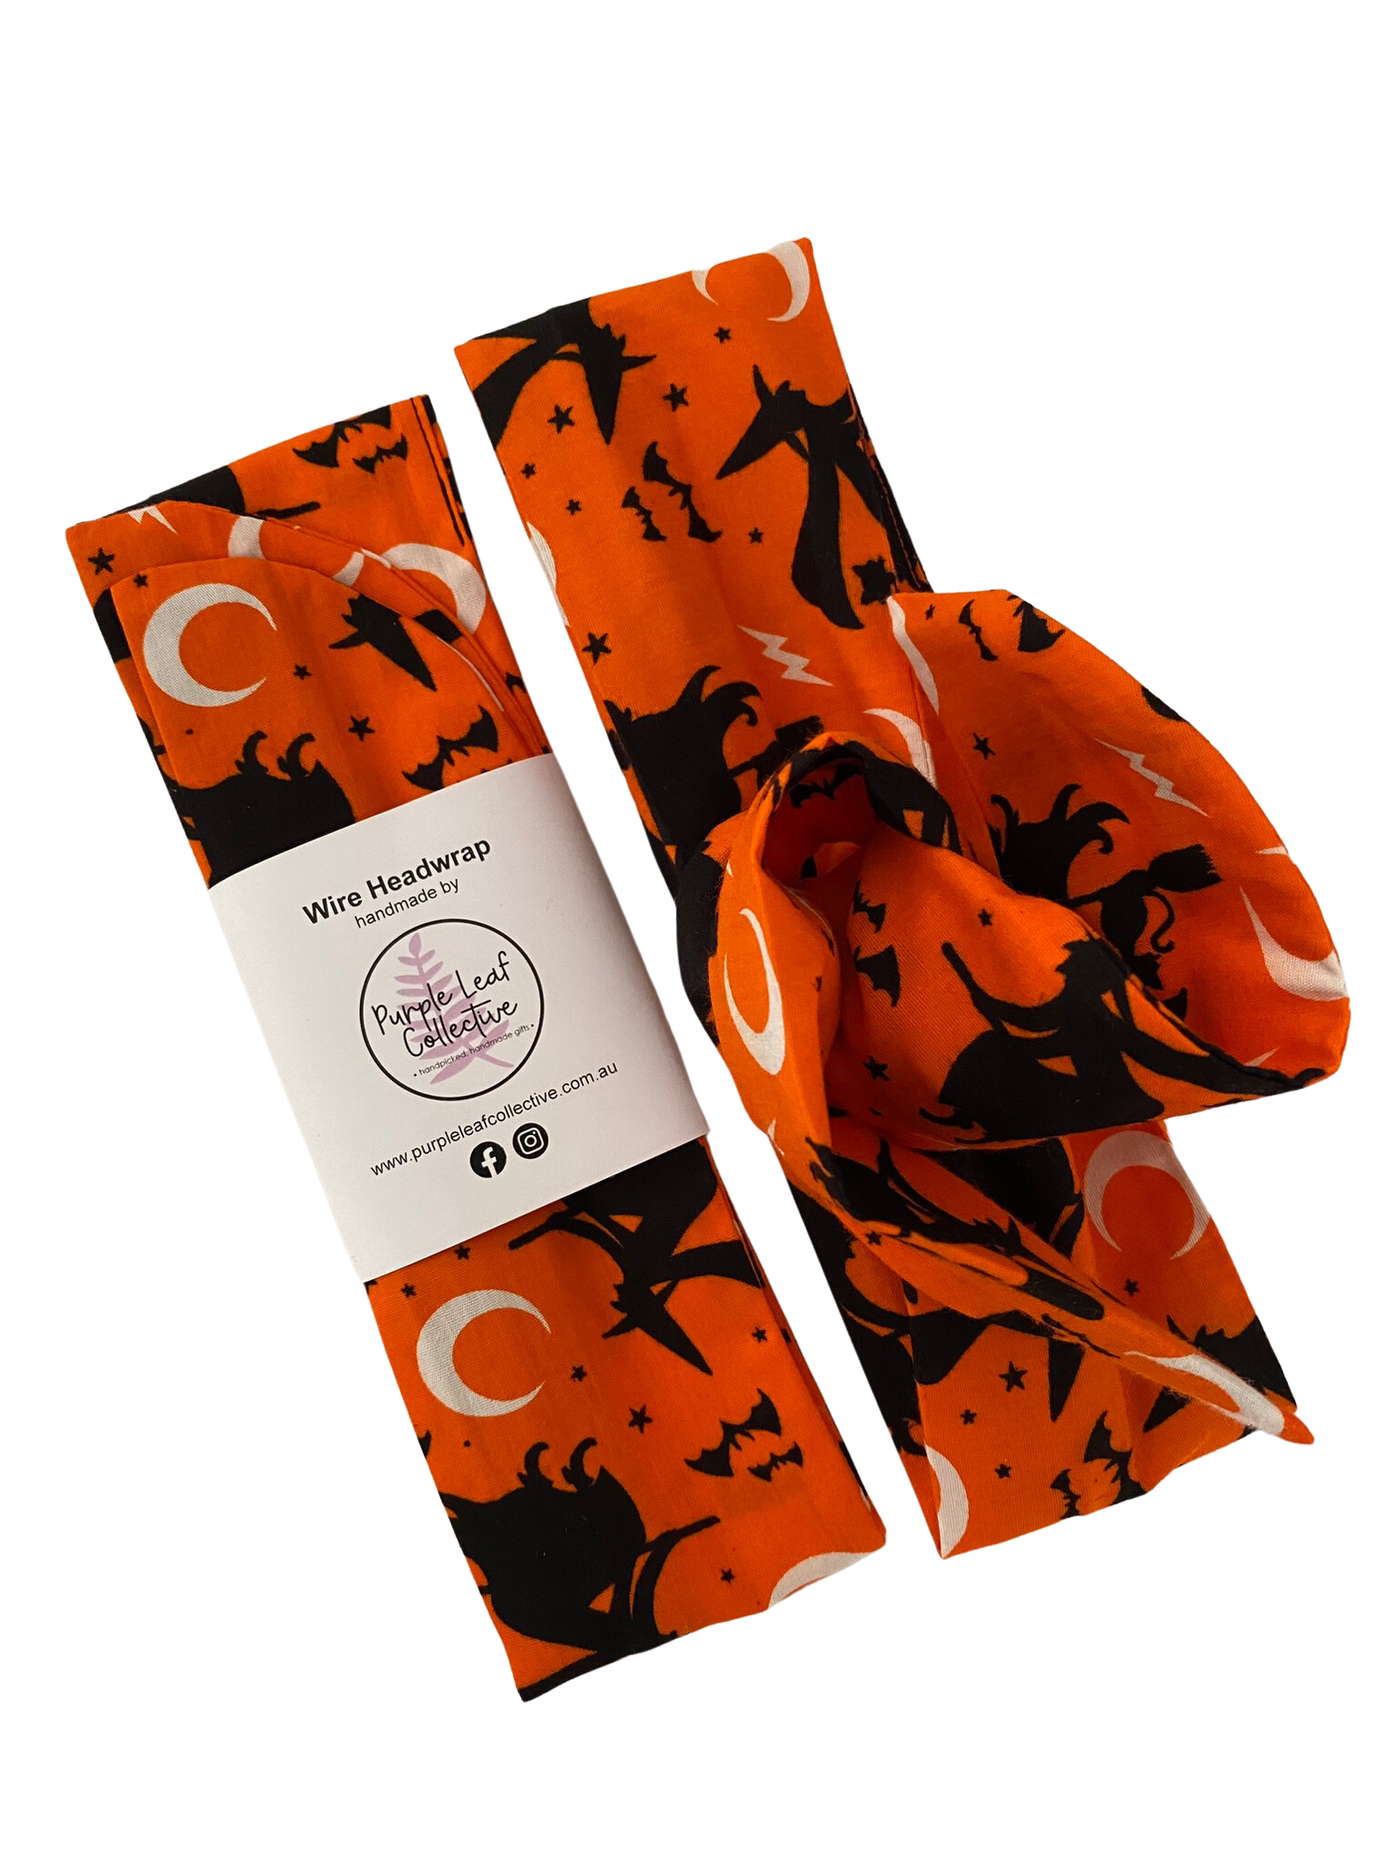 Broomstick Witches Orange Wire Headwrap